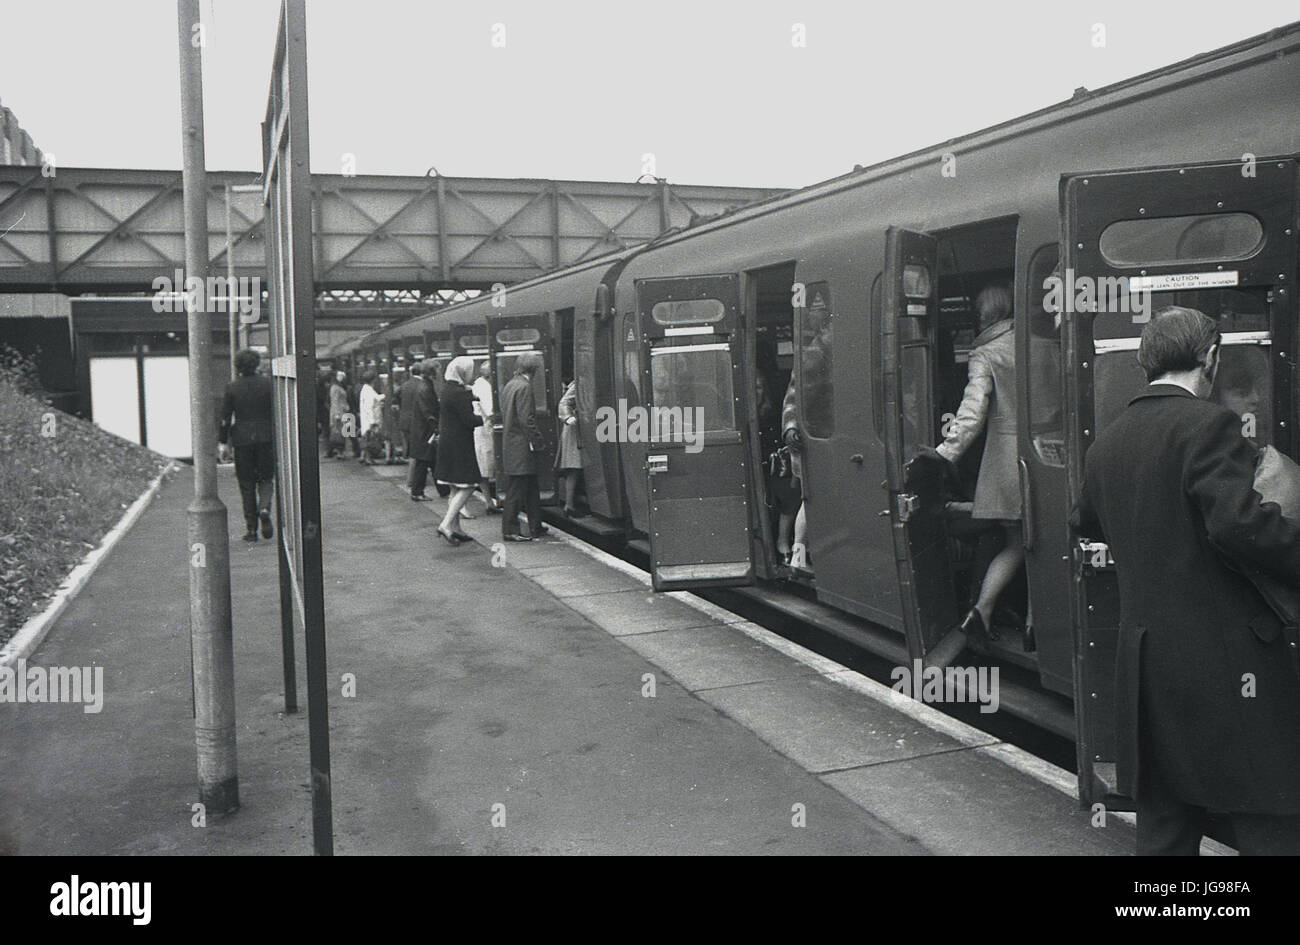 1972, British Rail, South East London, England, UK, Brockley train station, home to rail services from Southern Region. Picture shows commuters boarding train carriages from platform. Stock Photo